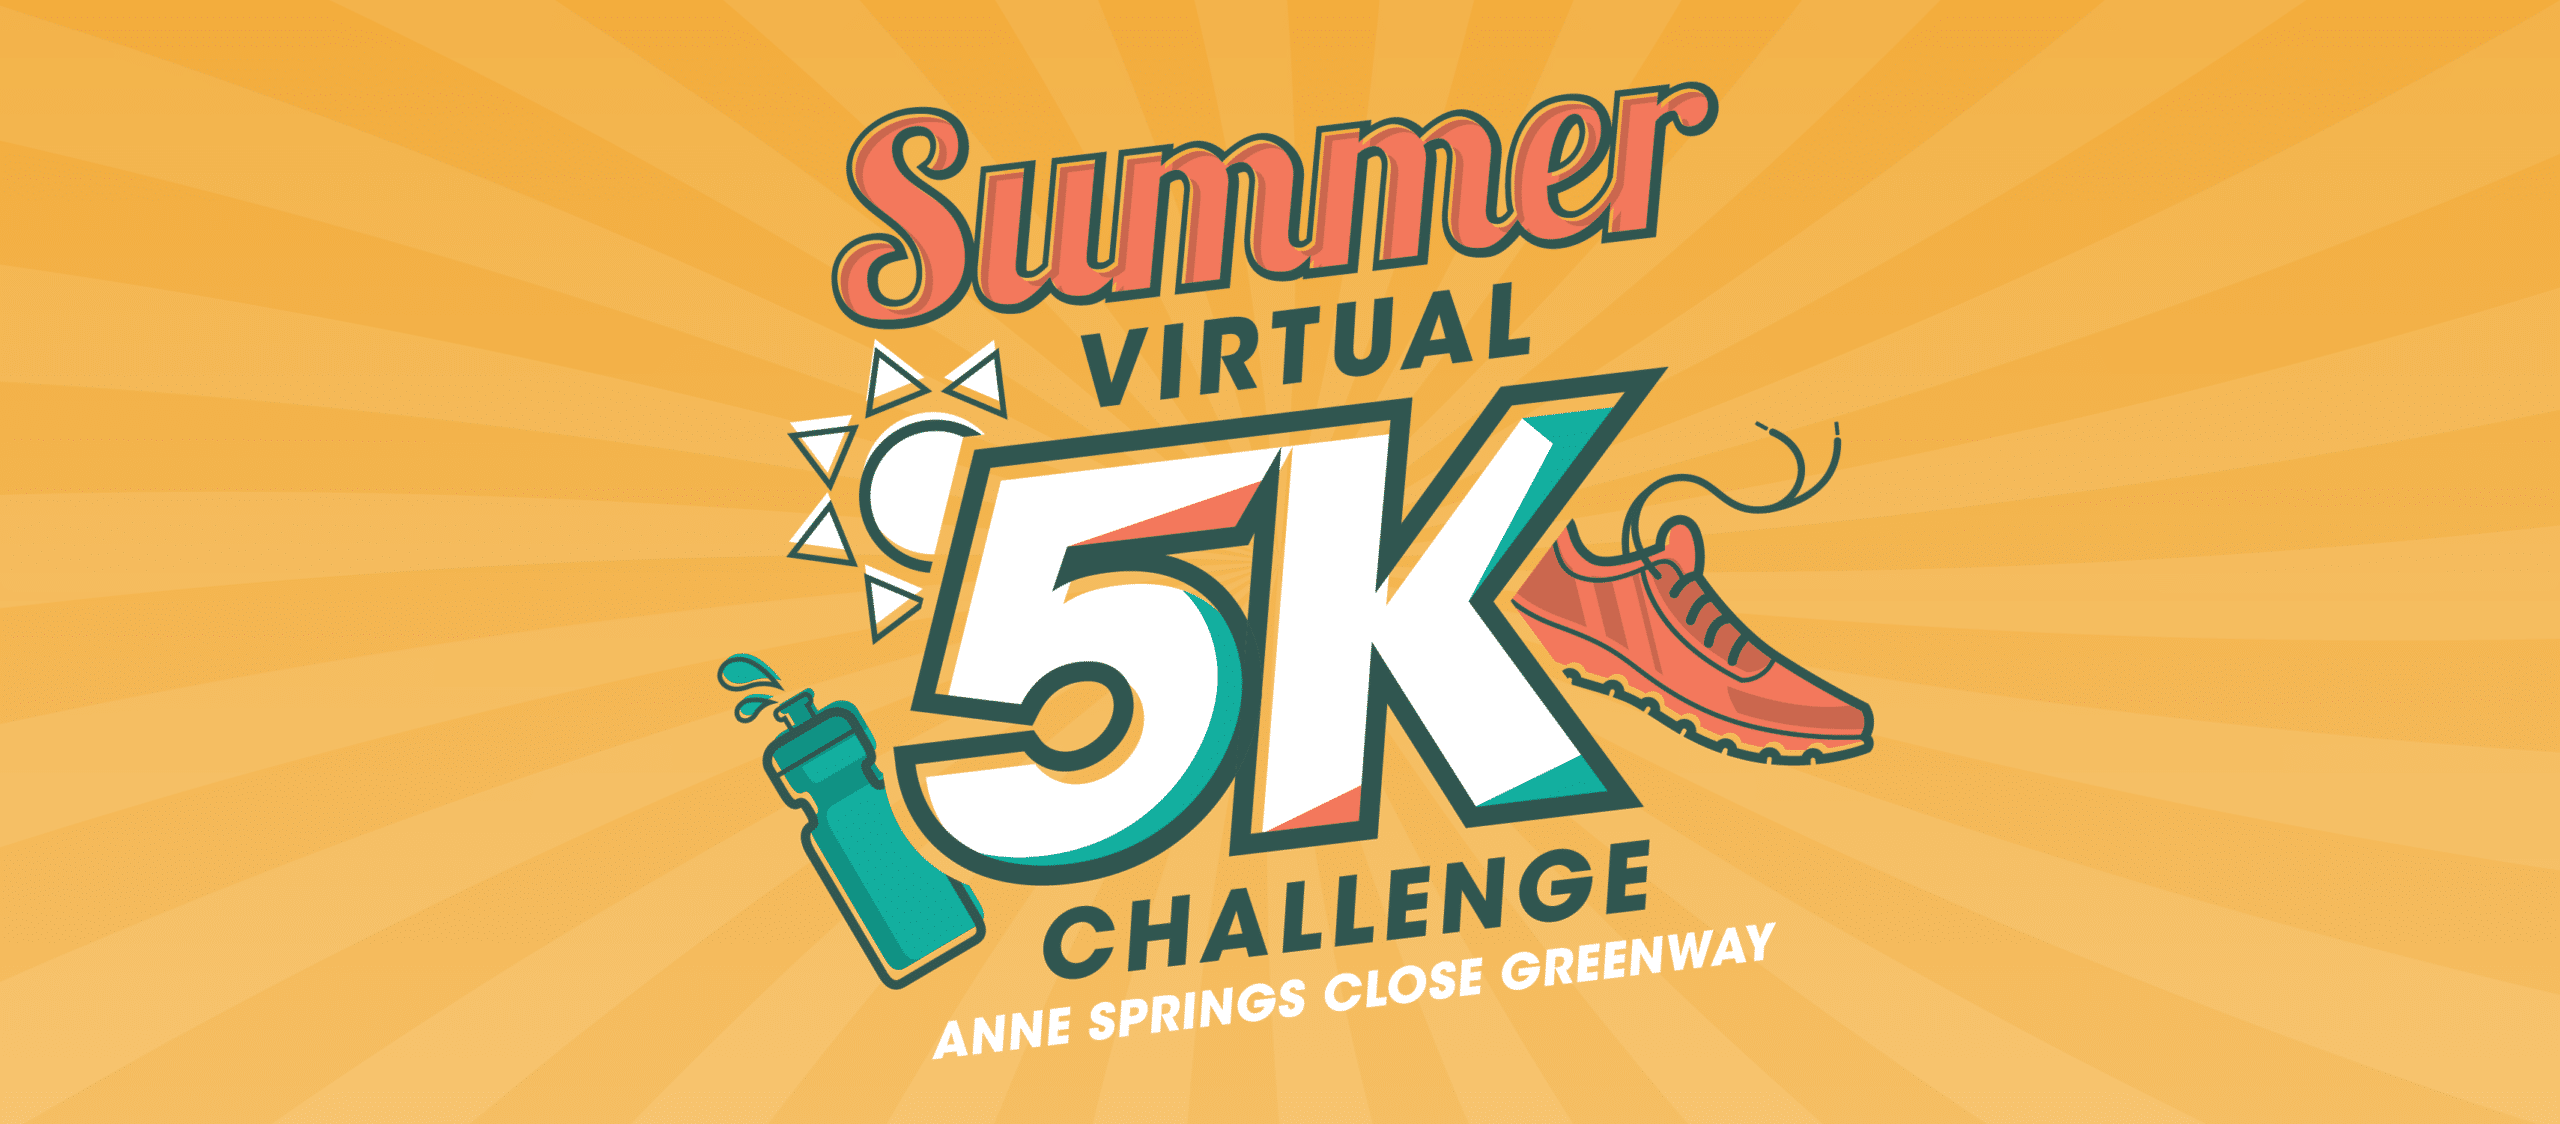 Logo of Anne Springs Close Greenway's Summer Virtual 5K Challenge